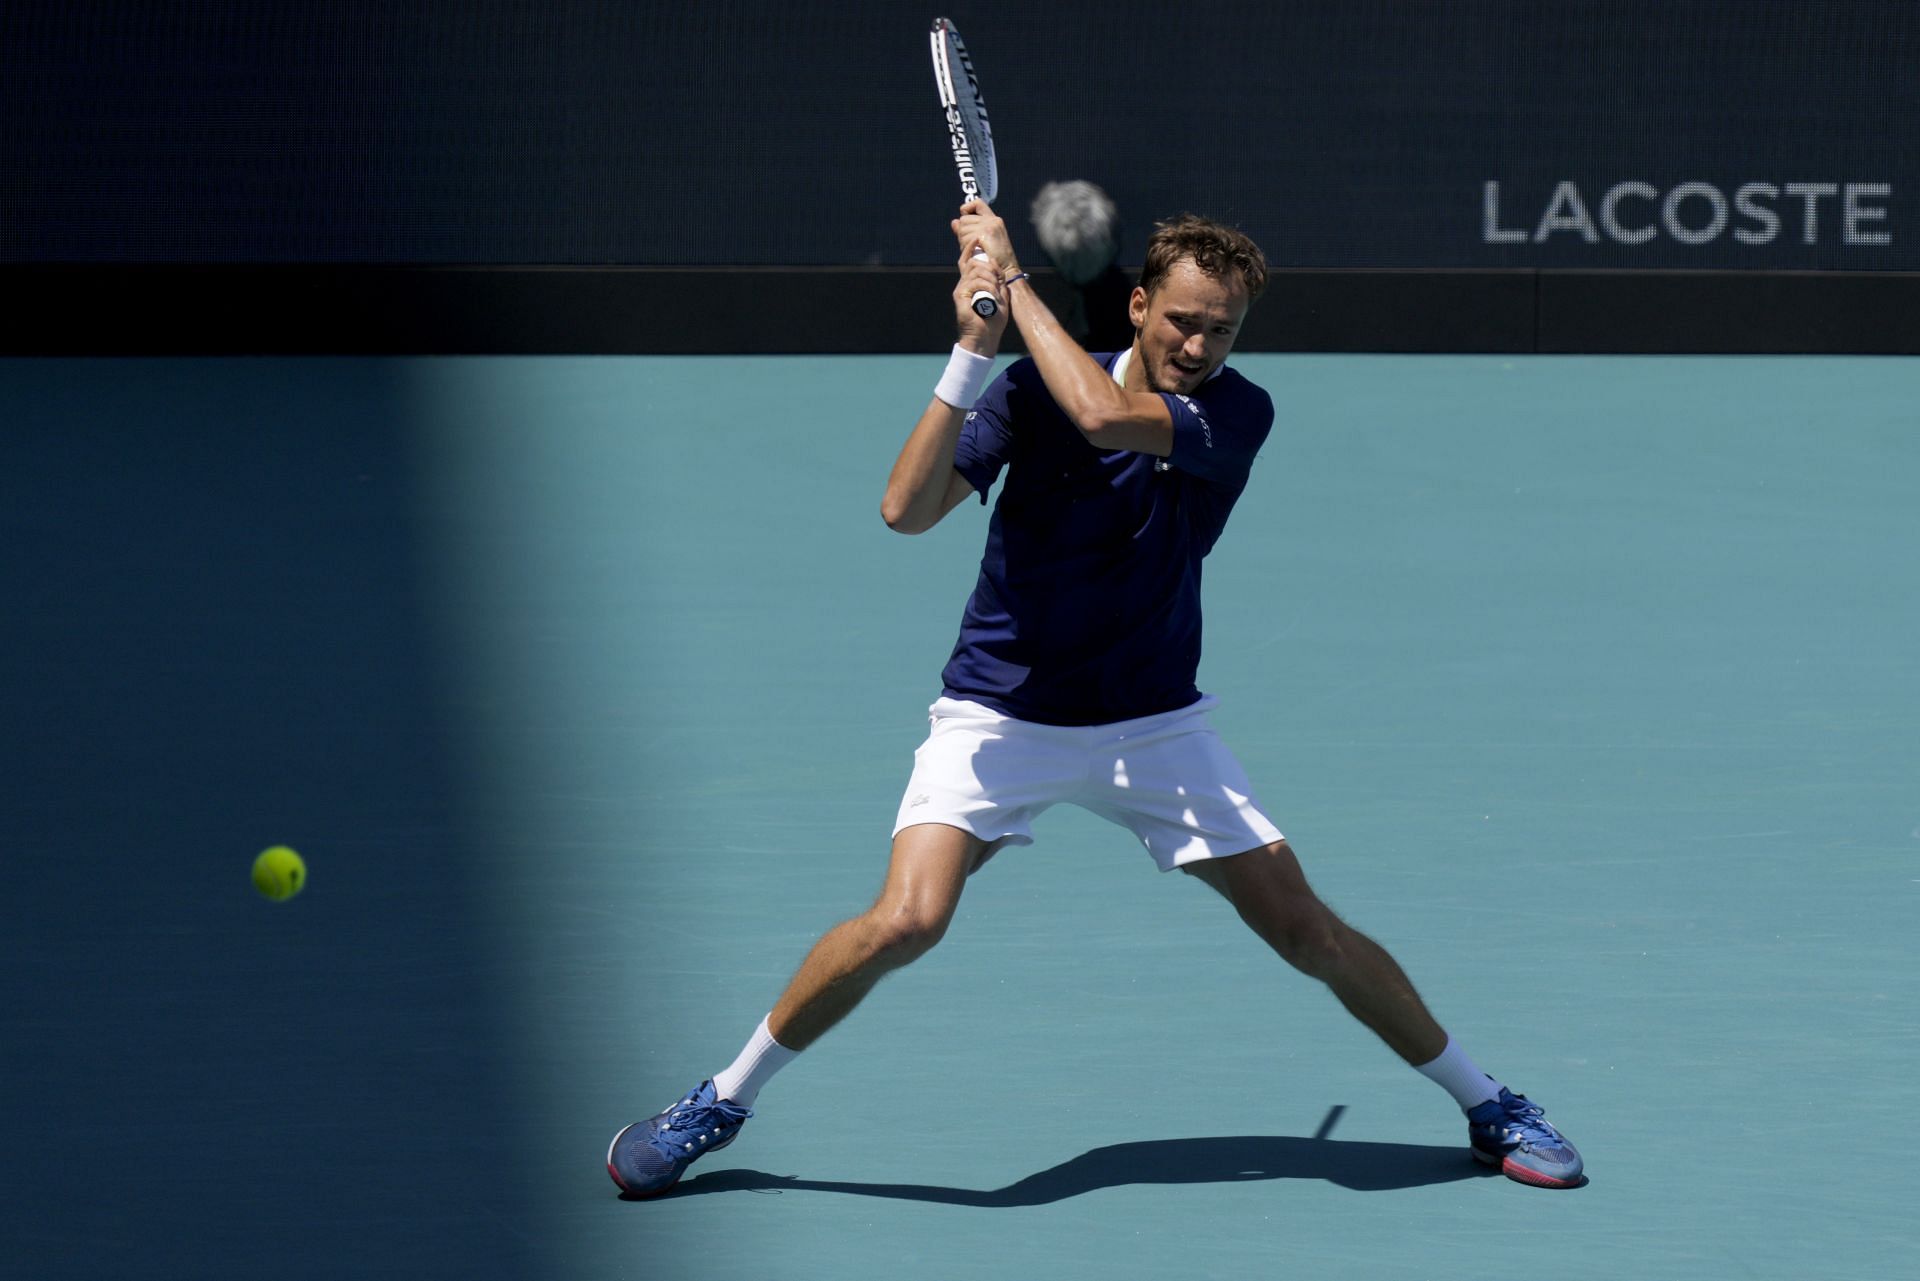 Andy Murray is one of the most ahletic active tennis players on tour.